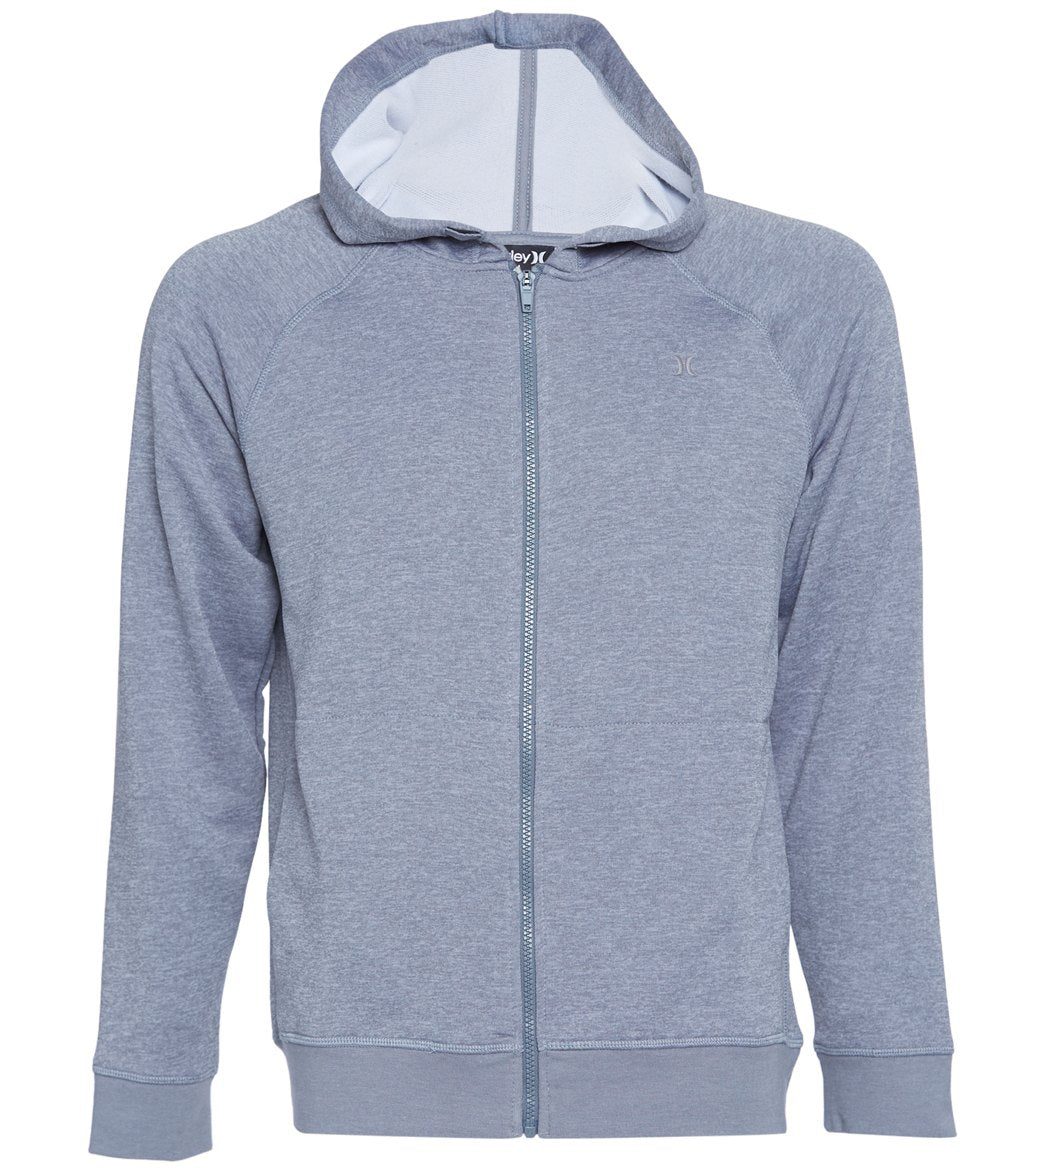 Hurley Men's Dri Fit Disperse Full Zip Hoodie - Cool Grey Small Polyester - Swimoutlet.com